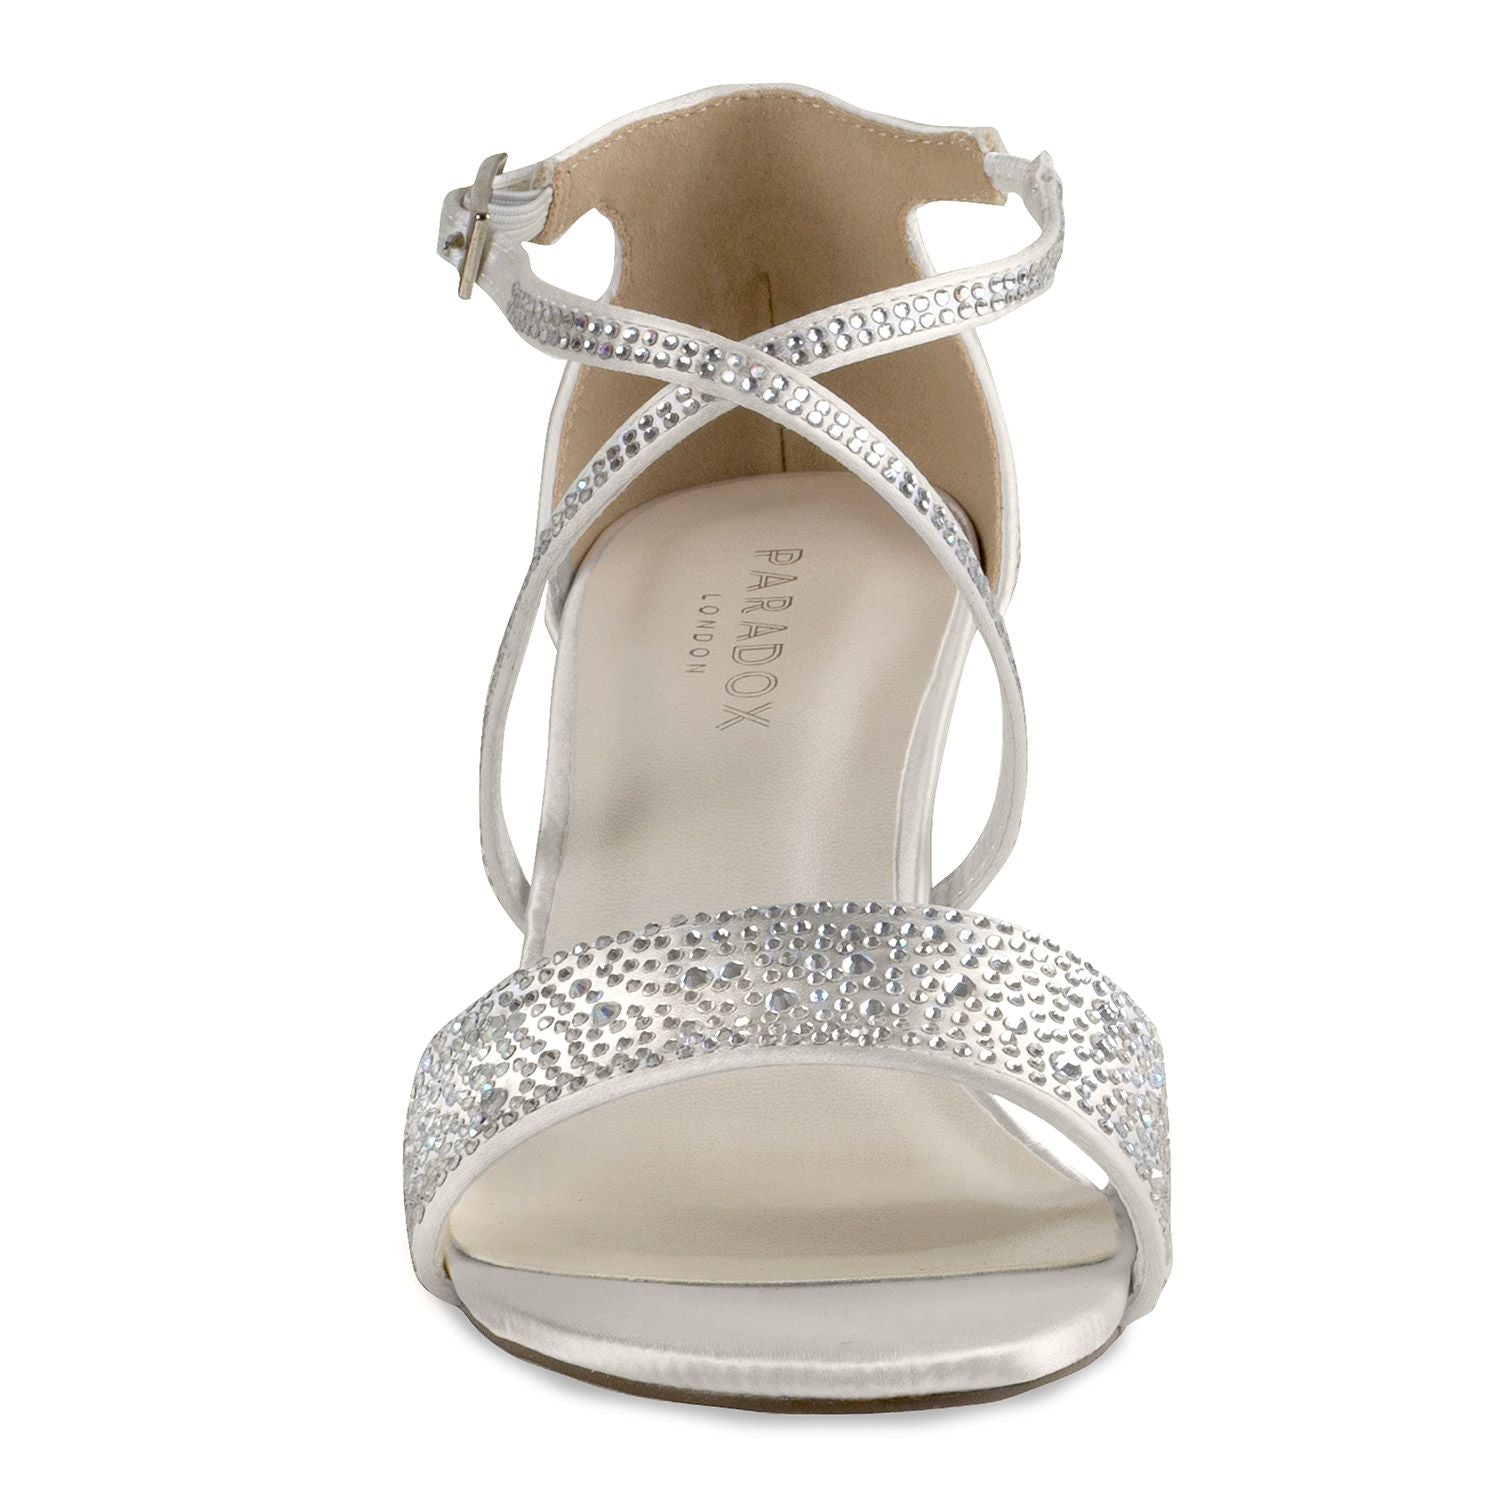 Front view of Shimmer shoe with 2 inch block heel and elegant stones